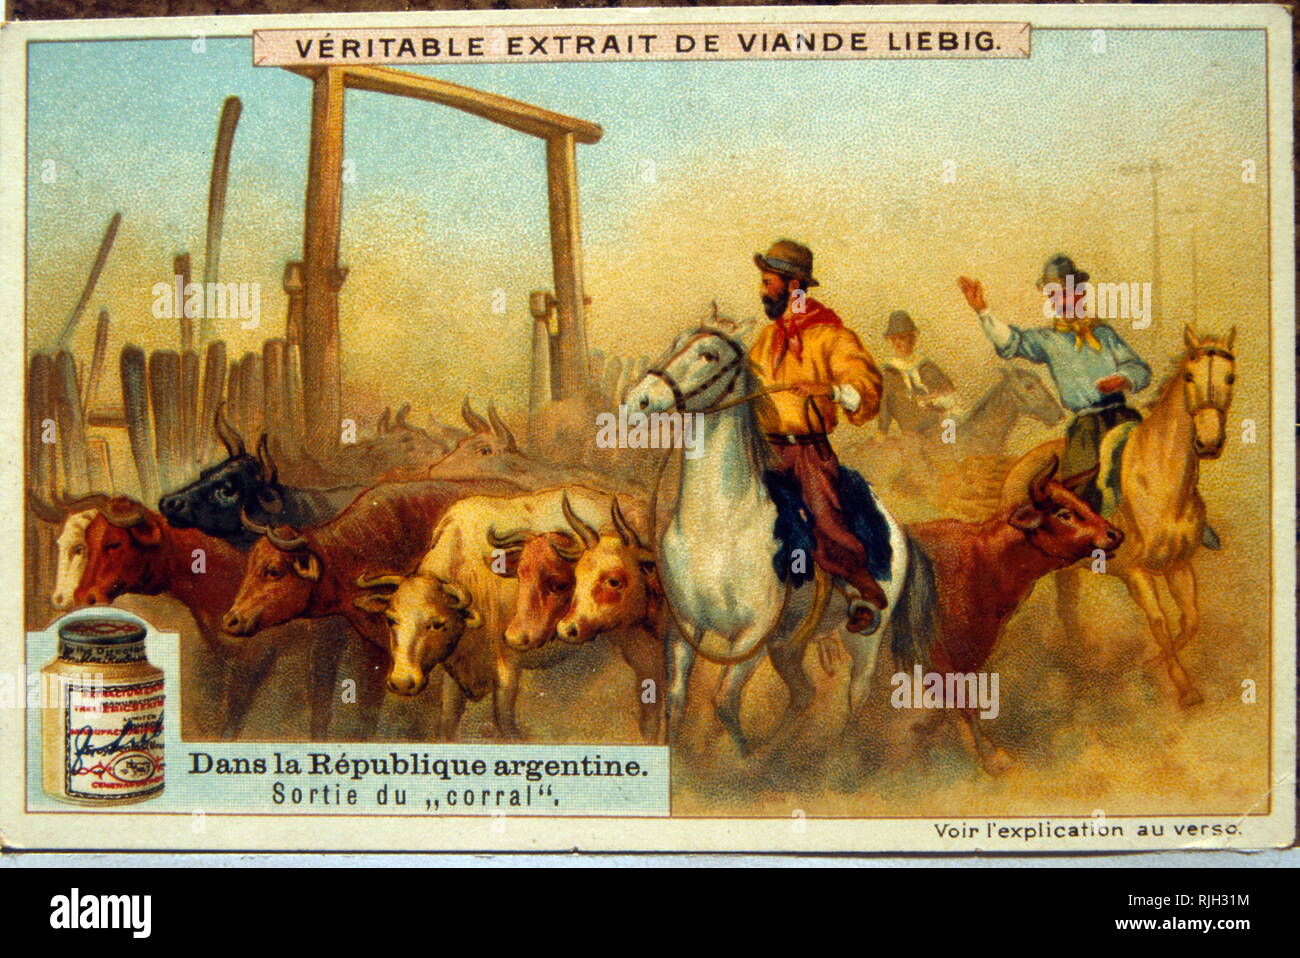 Liebig card showing South American Gauchos with cattle in Argentina 1900 Stock Photo